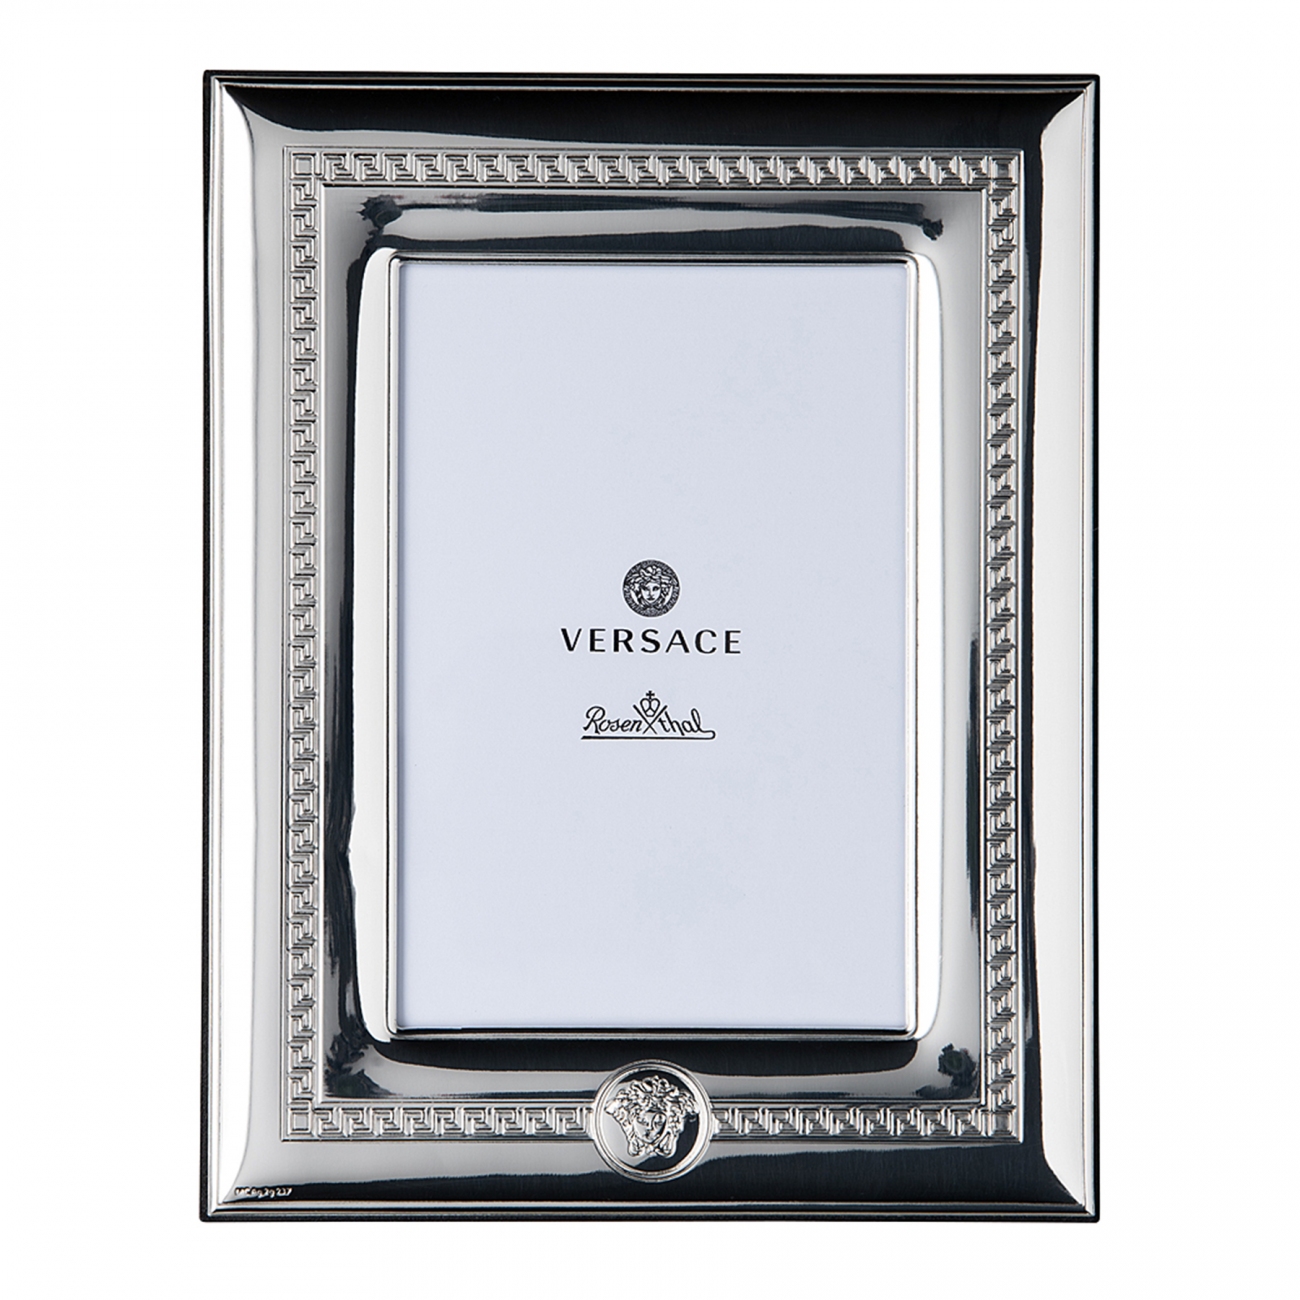 Rosenthal Versace Frames VHF6 Silver Picture frame